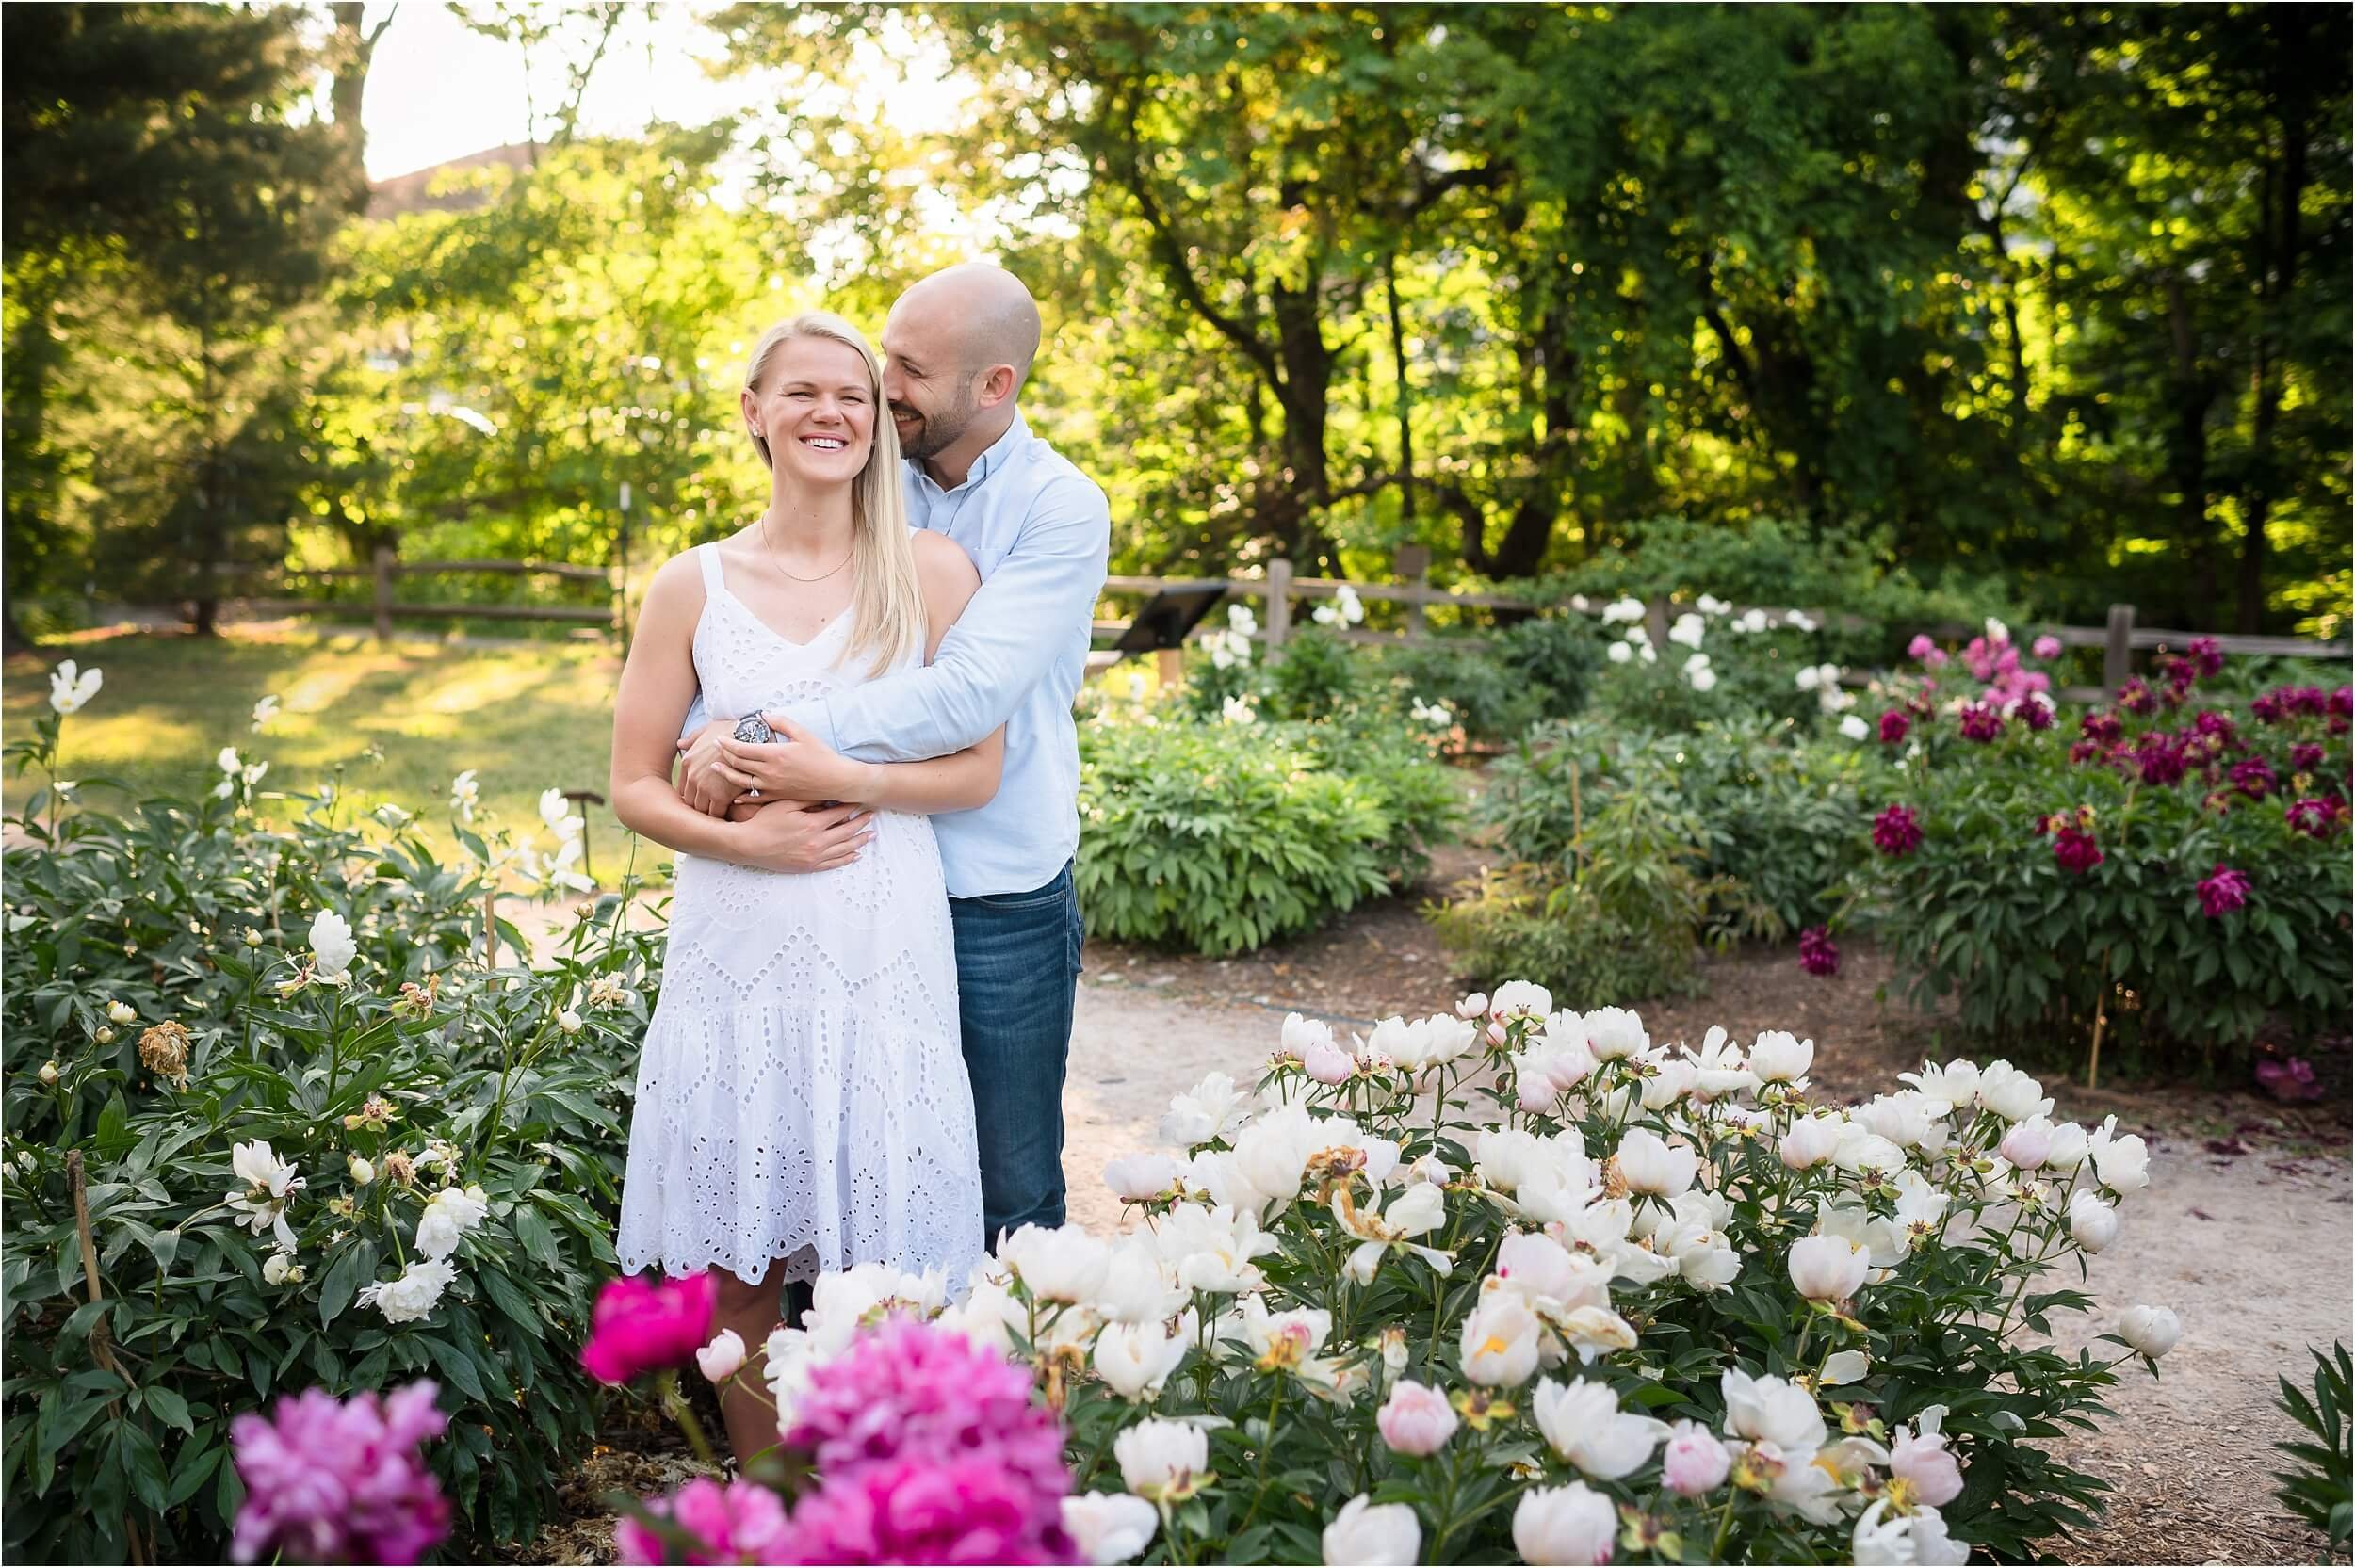  A couple laughs together during their portrait session in a lush garden.  